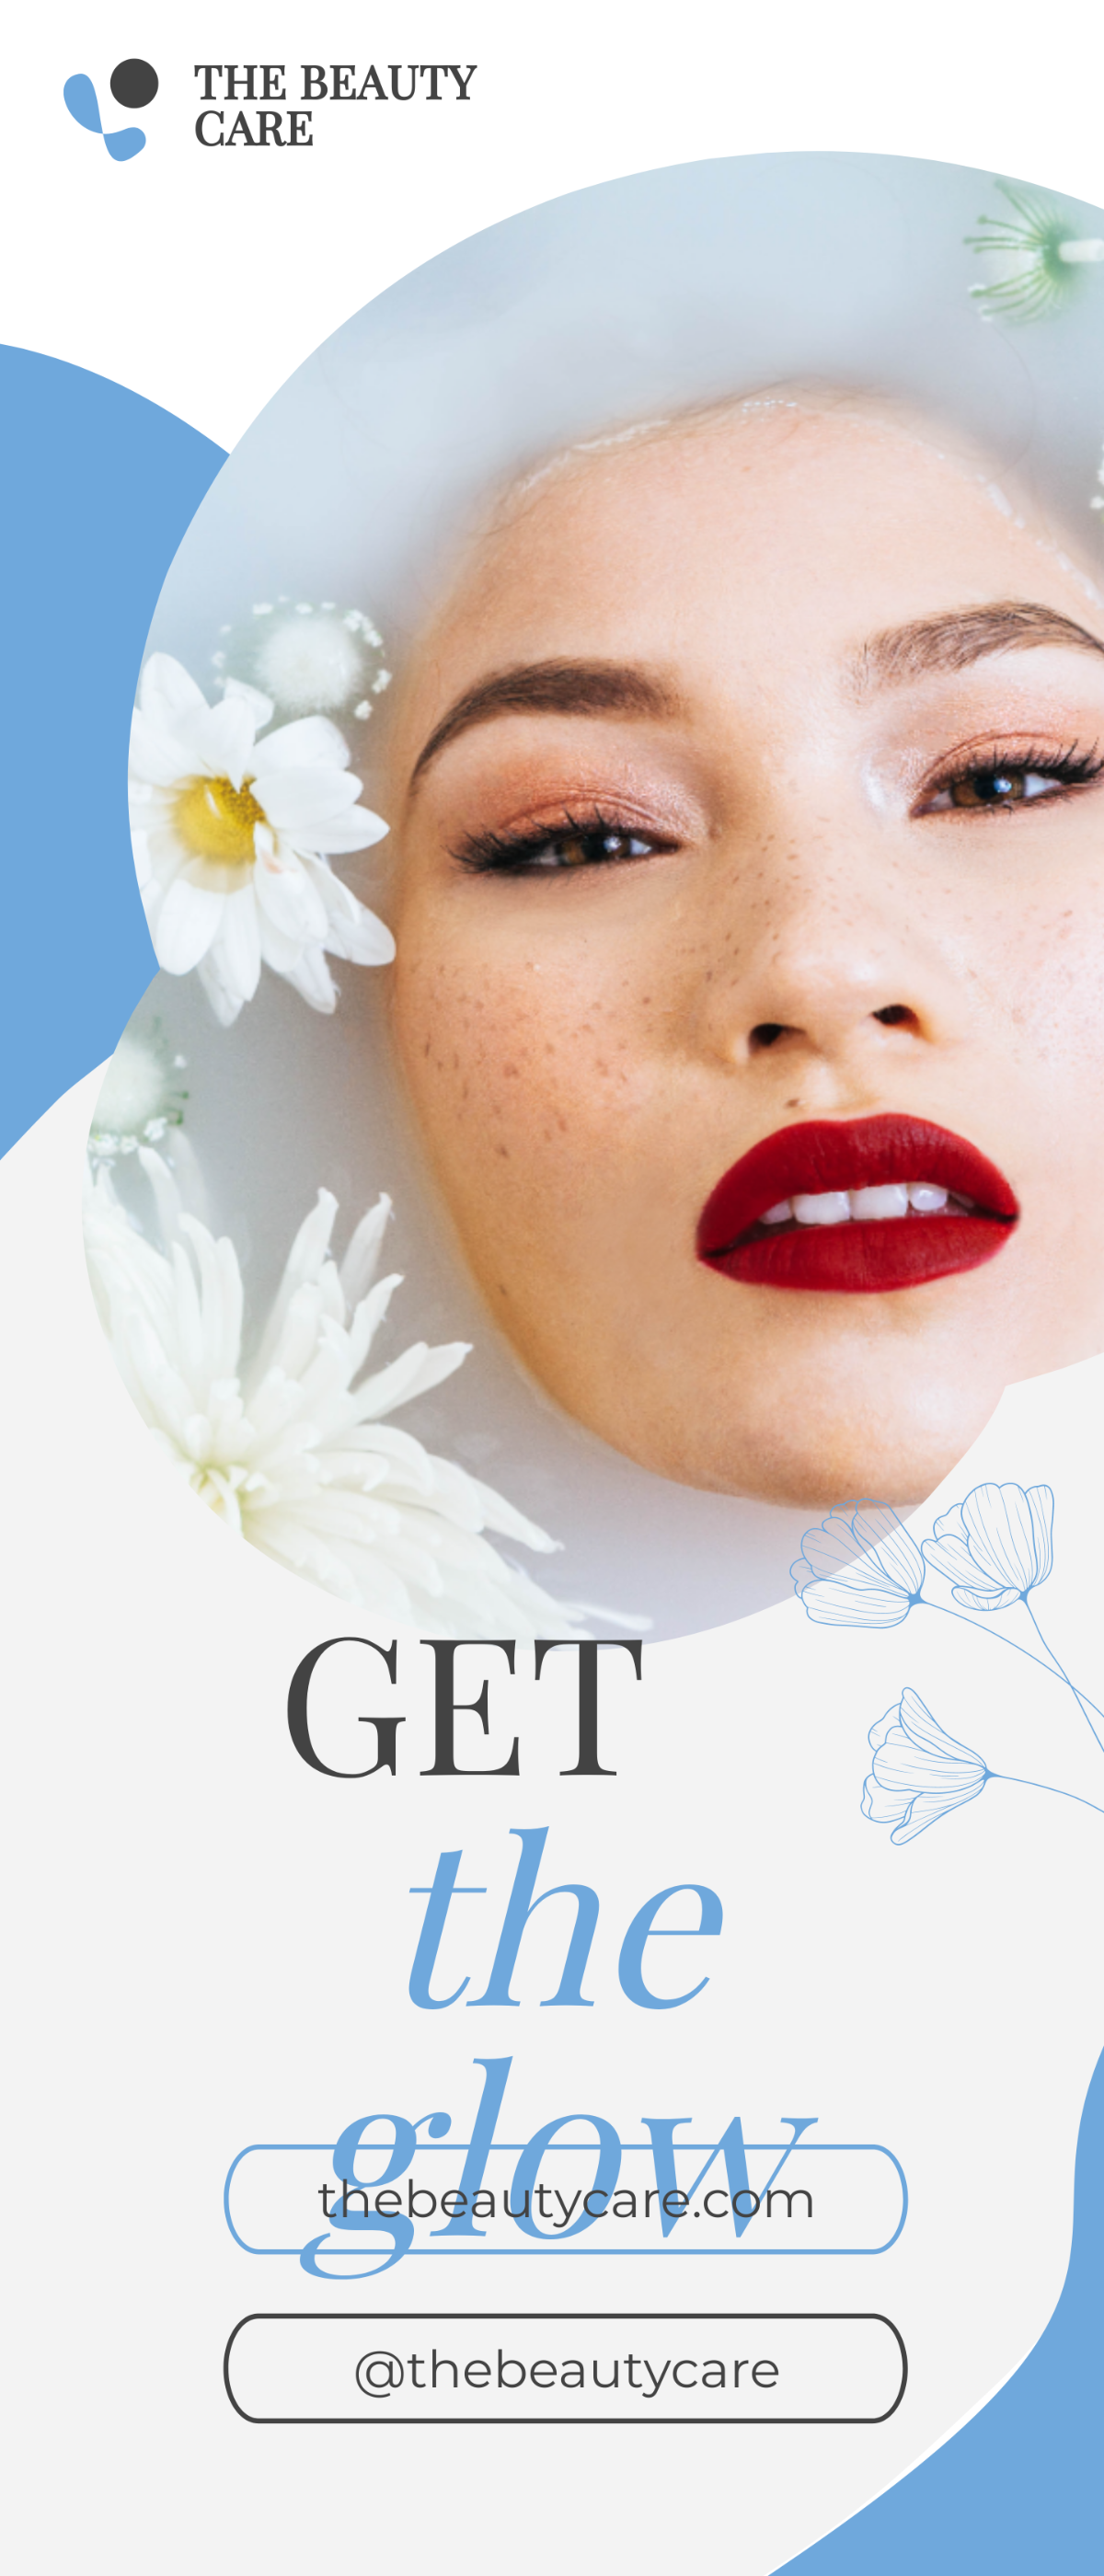 Skin Care Roll Up Banner Template